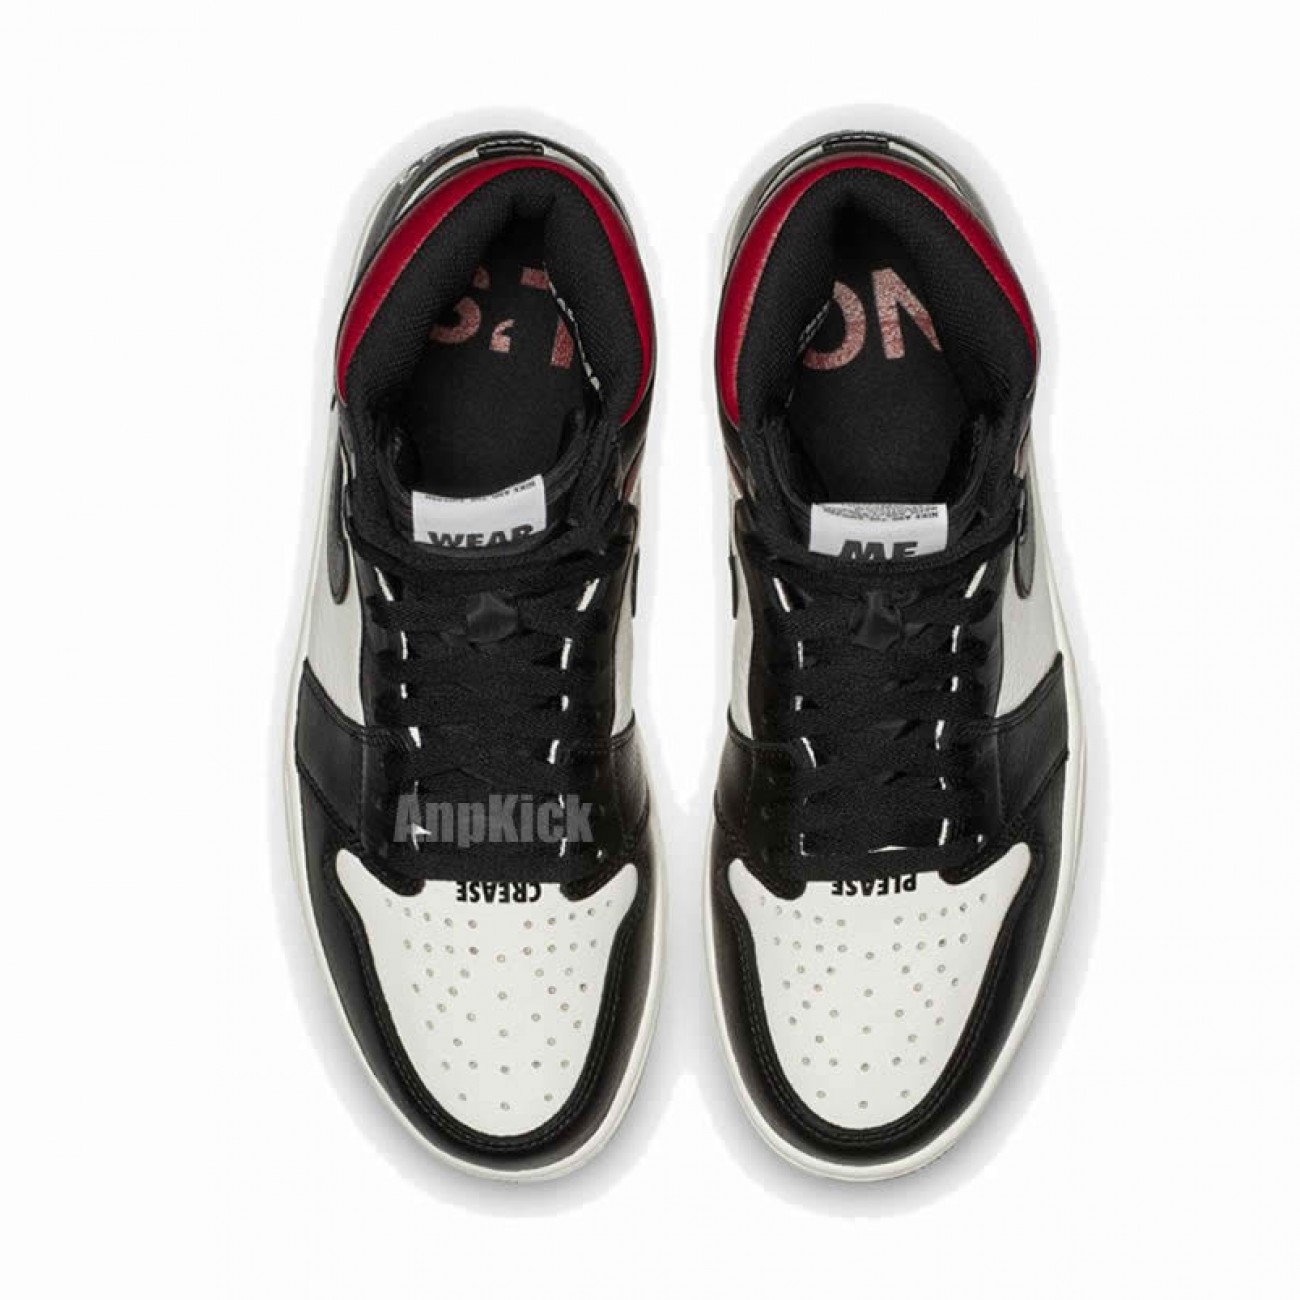 Air Jordan 1 "NO L'S" Not For Resale Release Date For Sale 861428-106